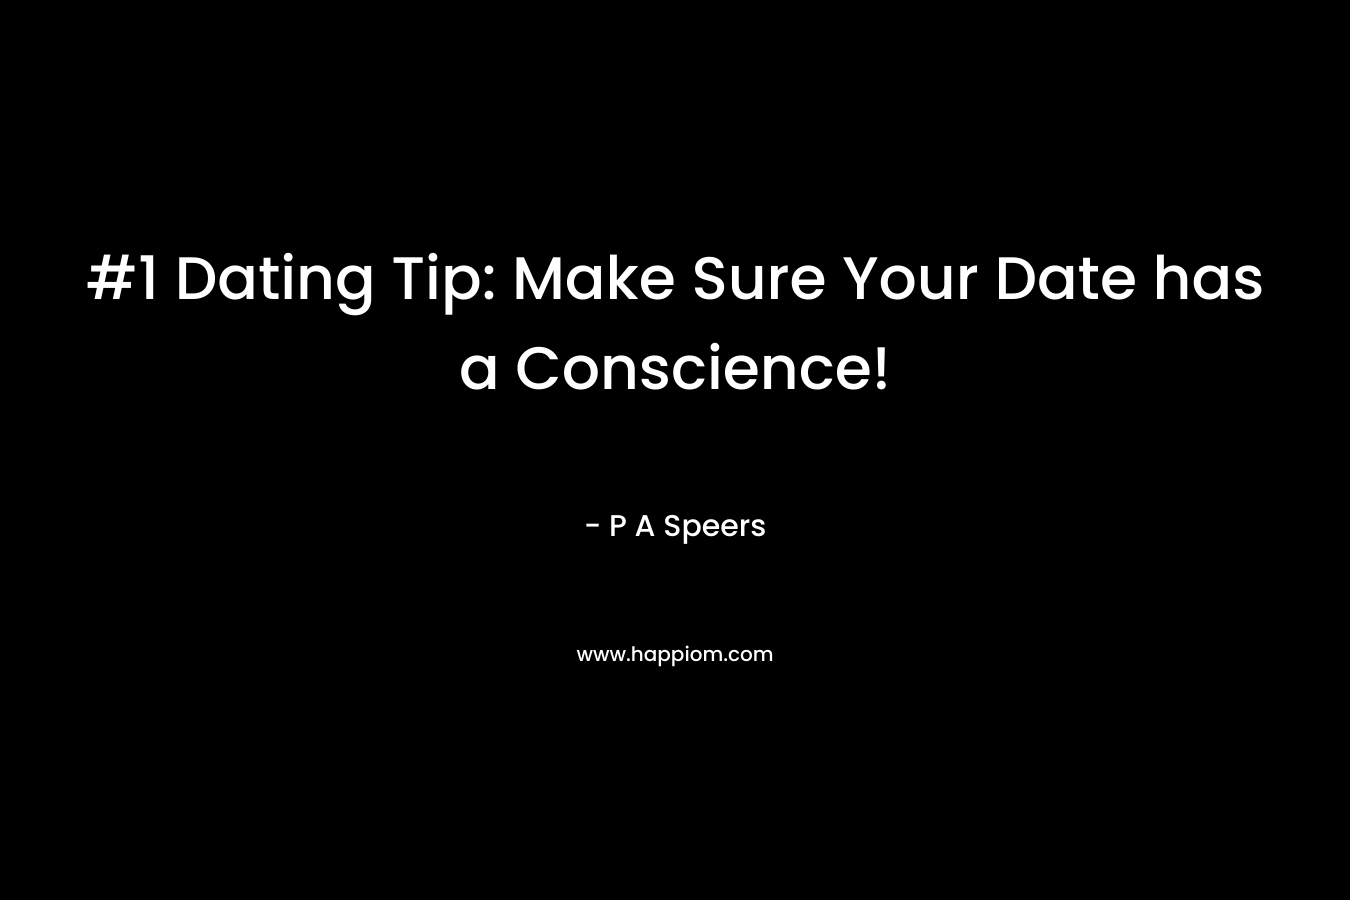 #1 Dating Tip: Make Sure Your Date has a Conscience! – P A Speers